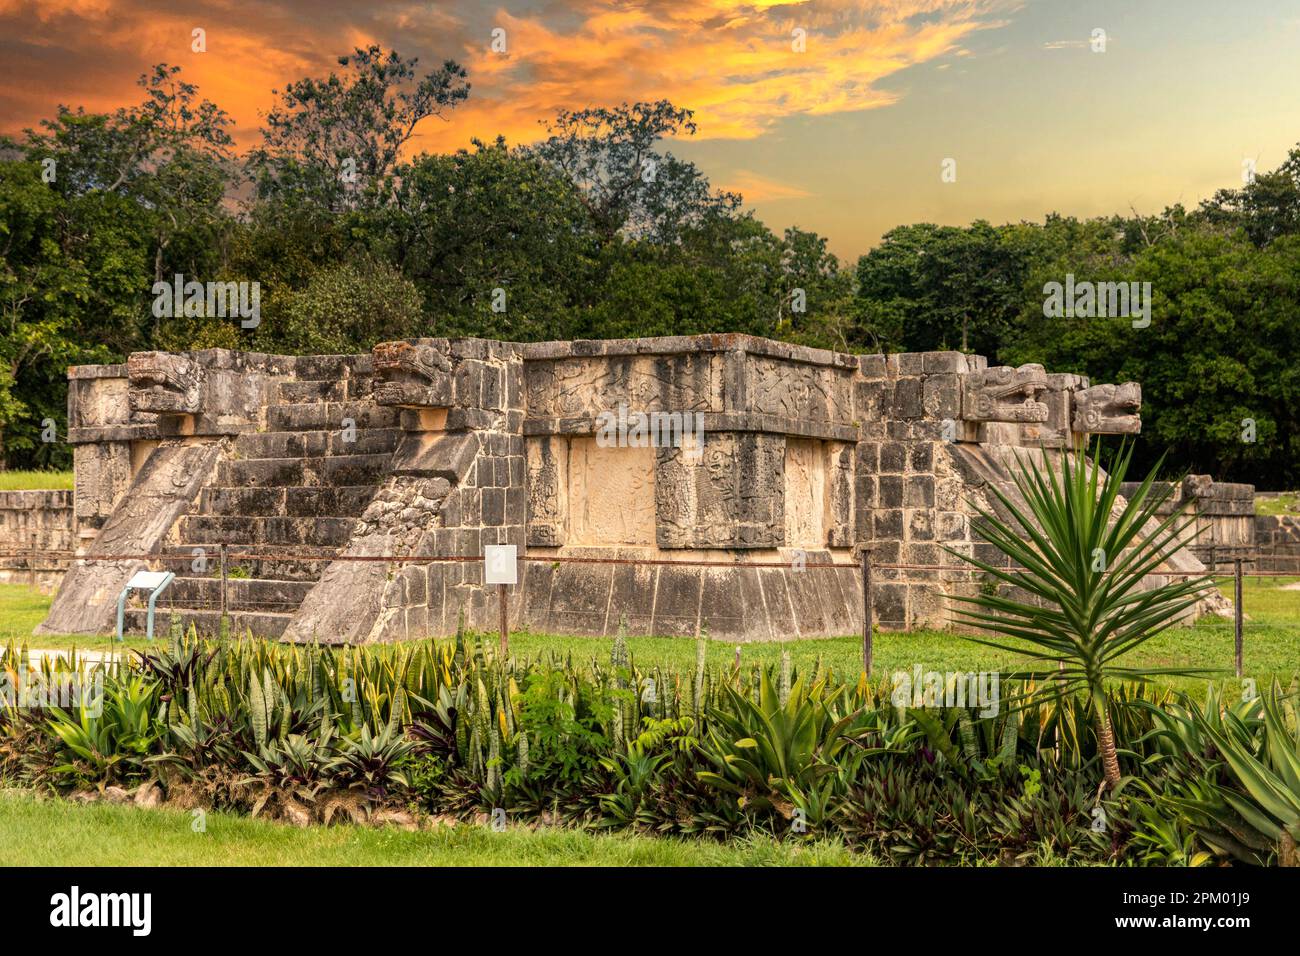 God Kukulkan on the platform of eagles and jaguars under a beautiful orange sunset, this is the feathered serpent of the Mayan civilization. Concept p Stock Photo